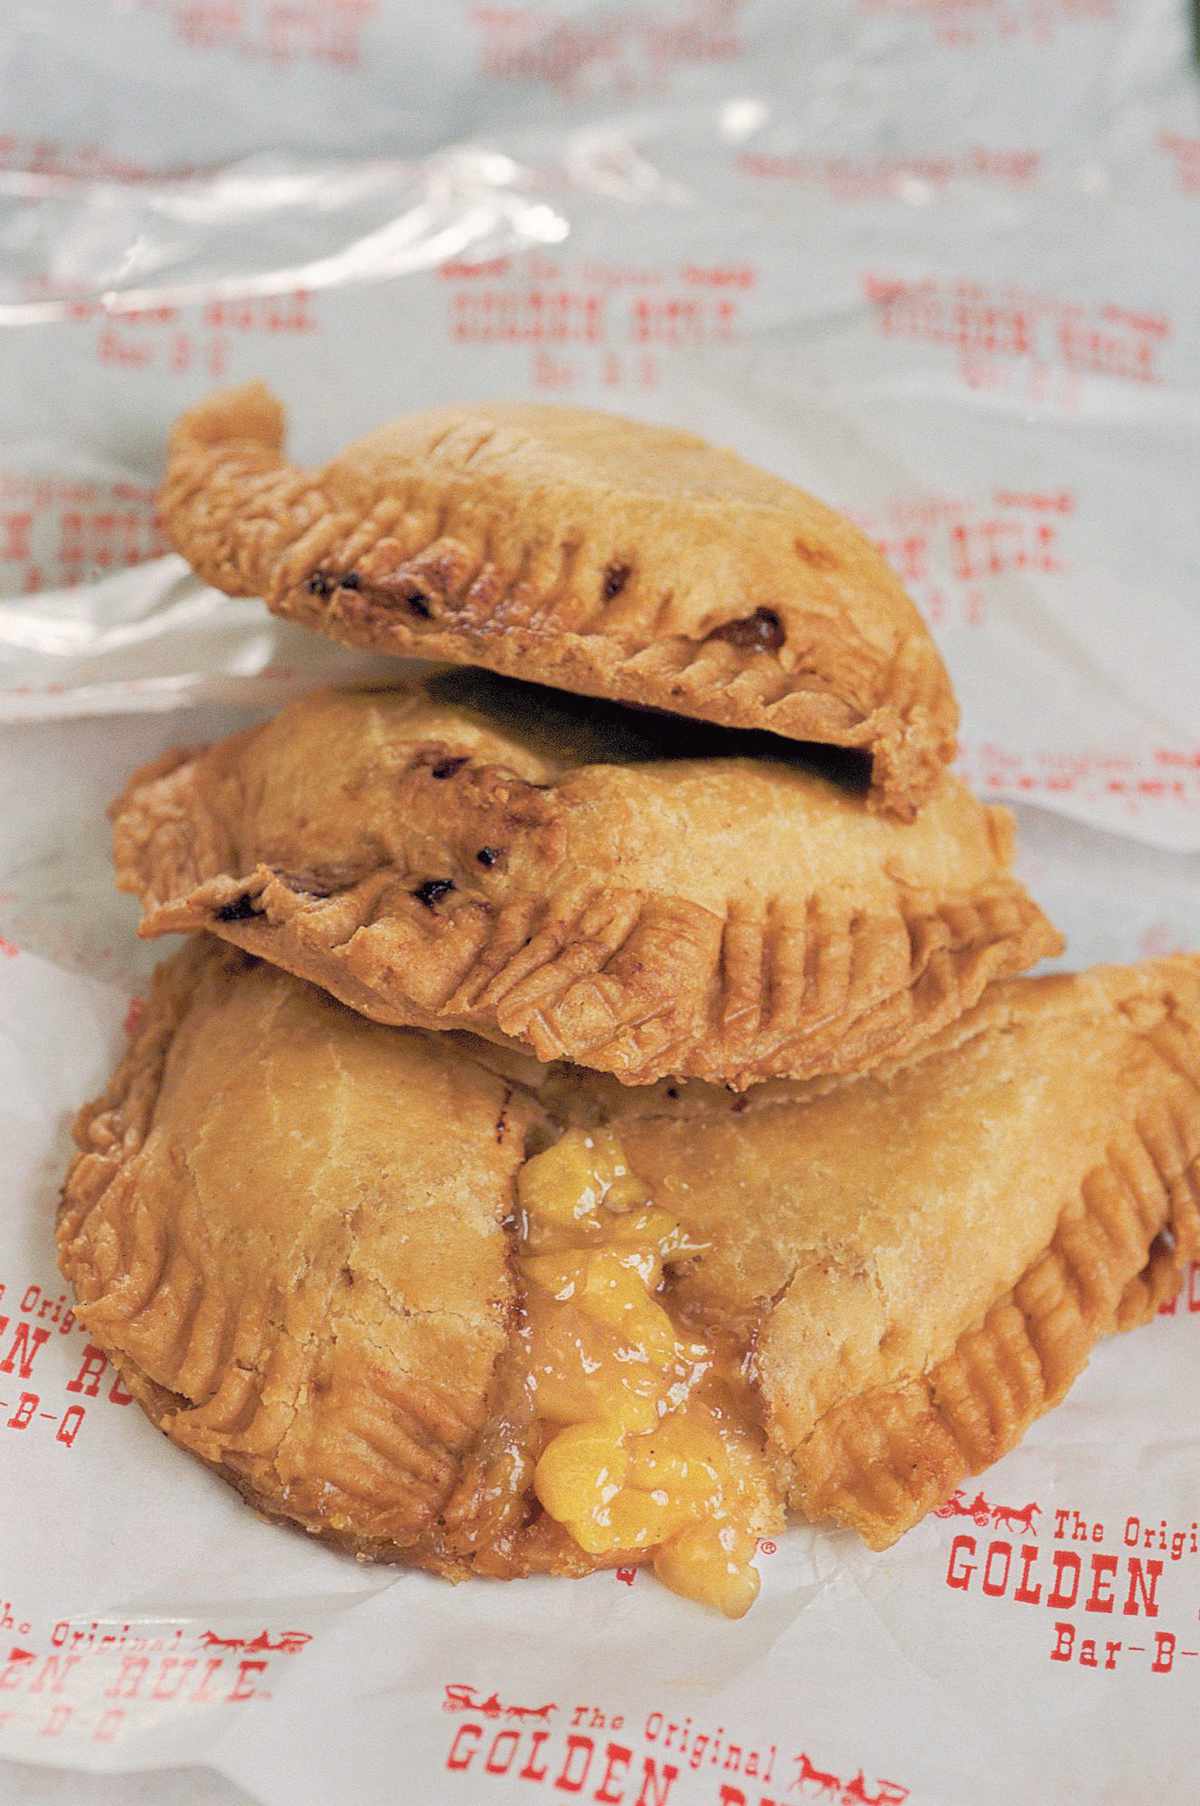 Hubig's Pies from New Orleans